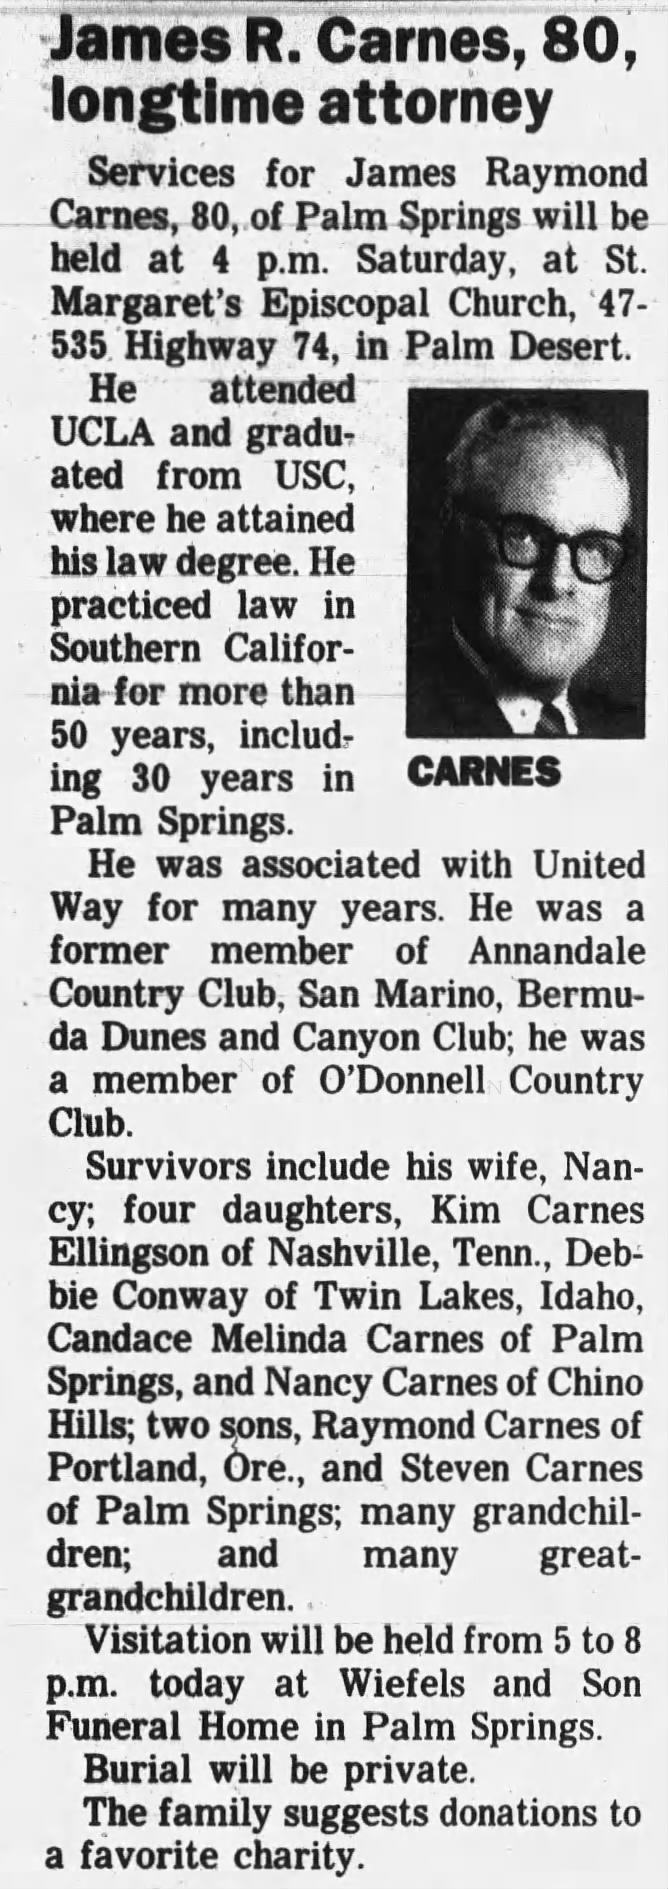 Obituary for James R. CARNES (Aged 80)